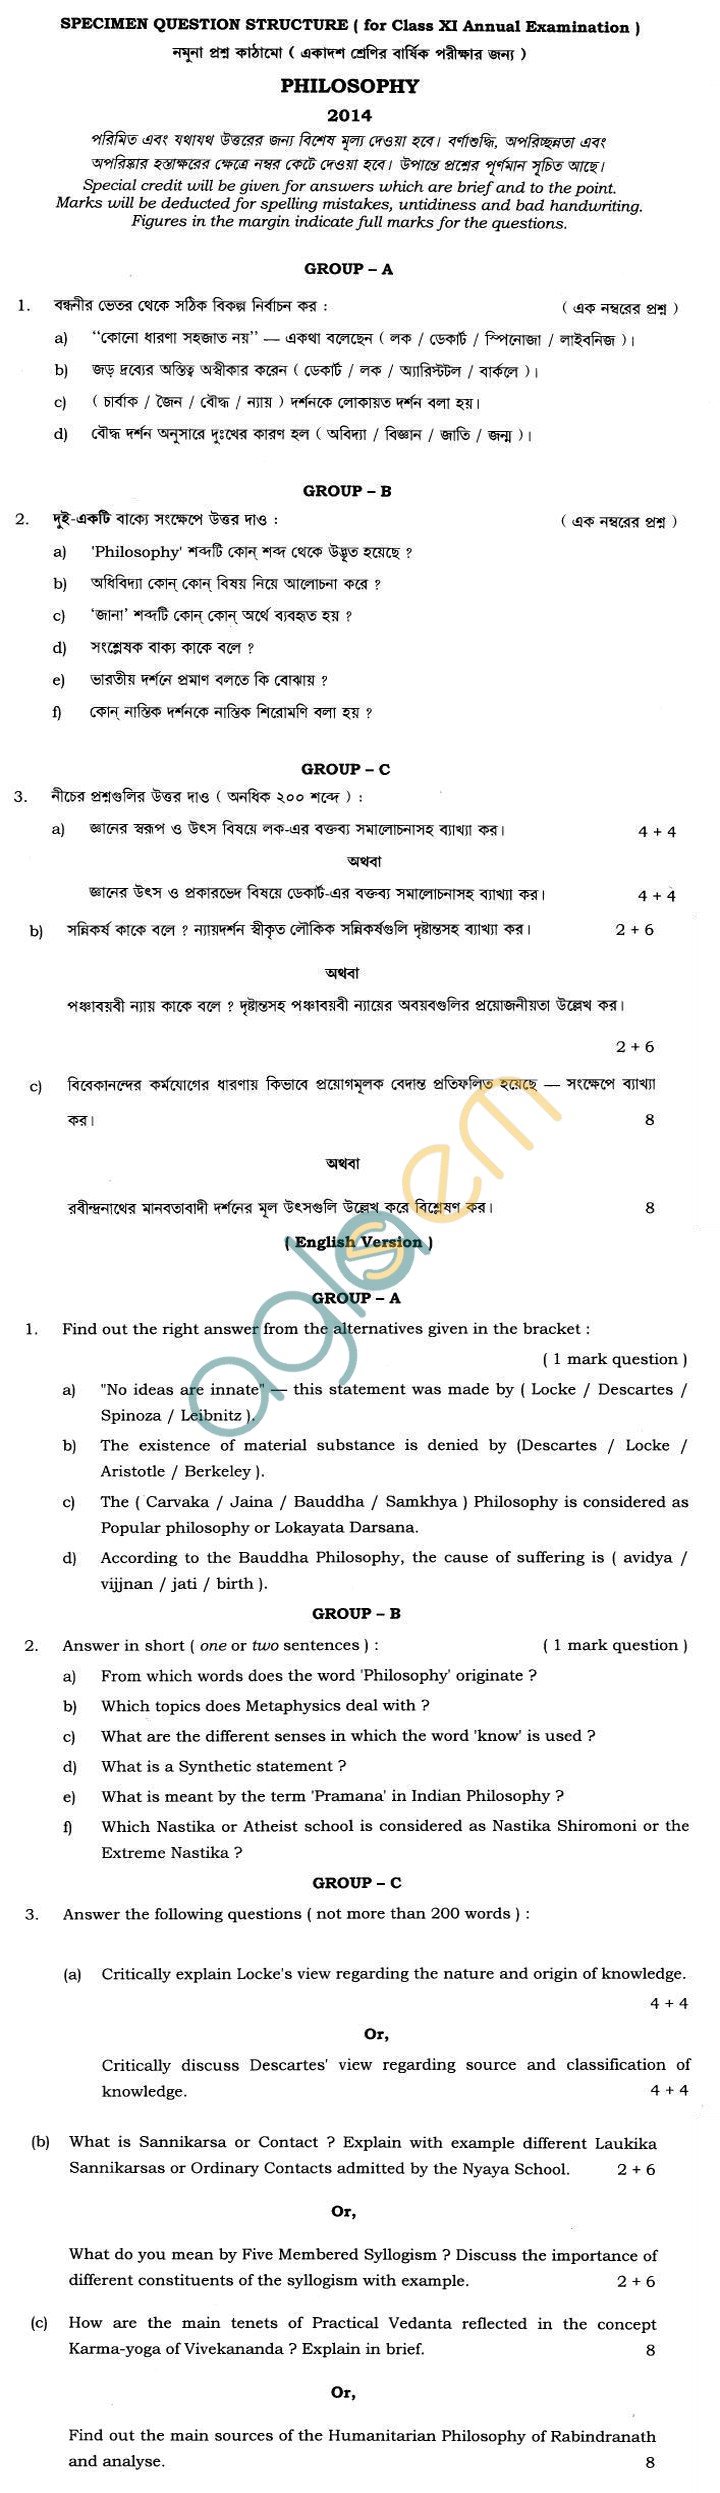 West Bengal Board Sample Question Paper for Class 11 - Philosophy/